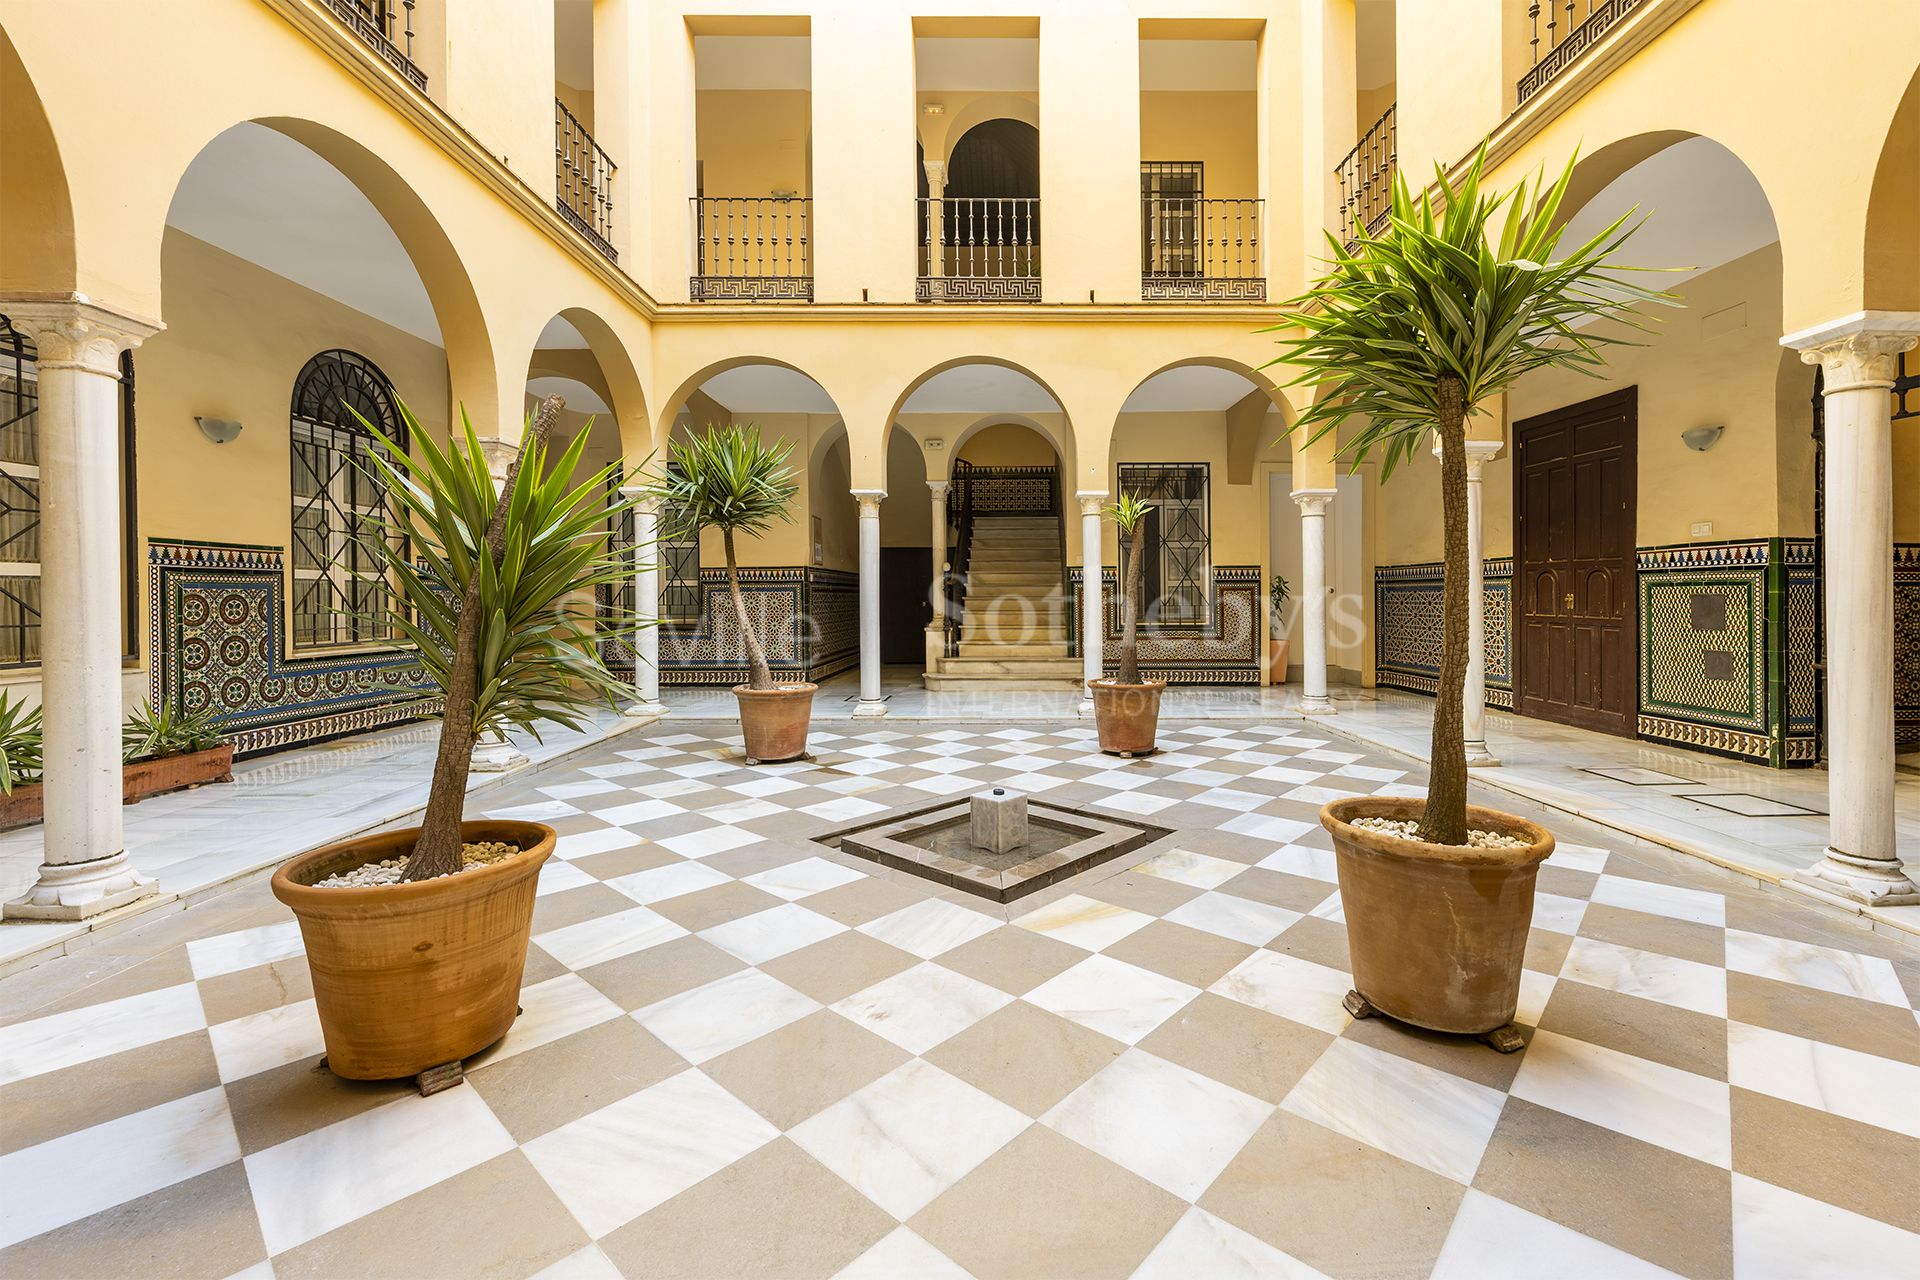 Apartment in Palace House in the center of Seville